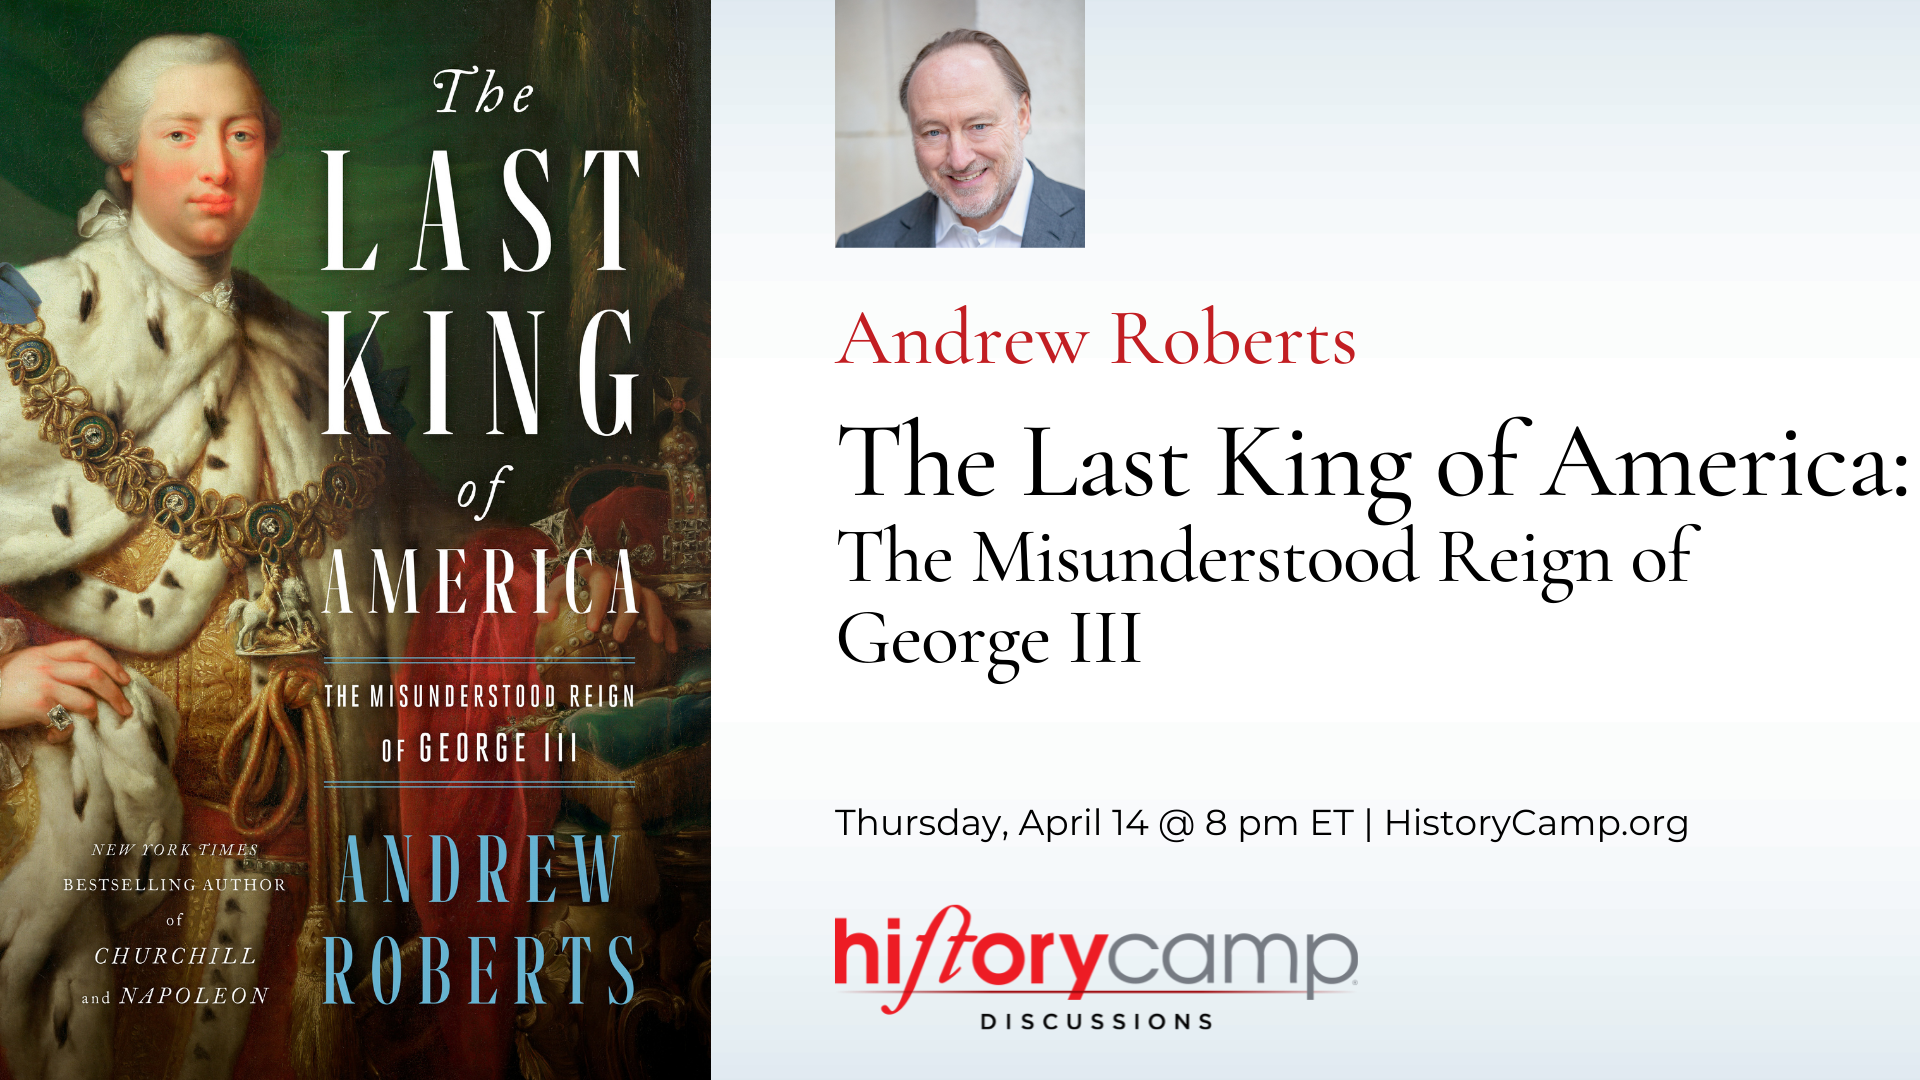 Andrew Roberts—The Last King of America: The Misunderstood Reign of George III